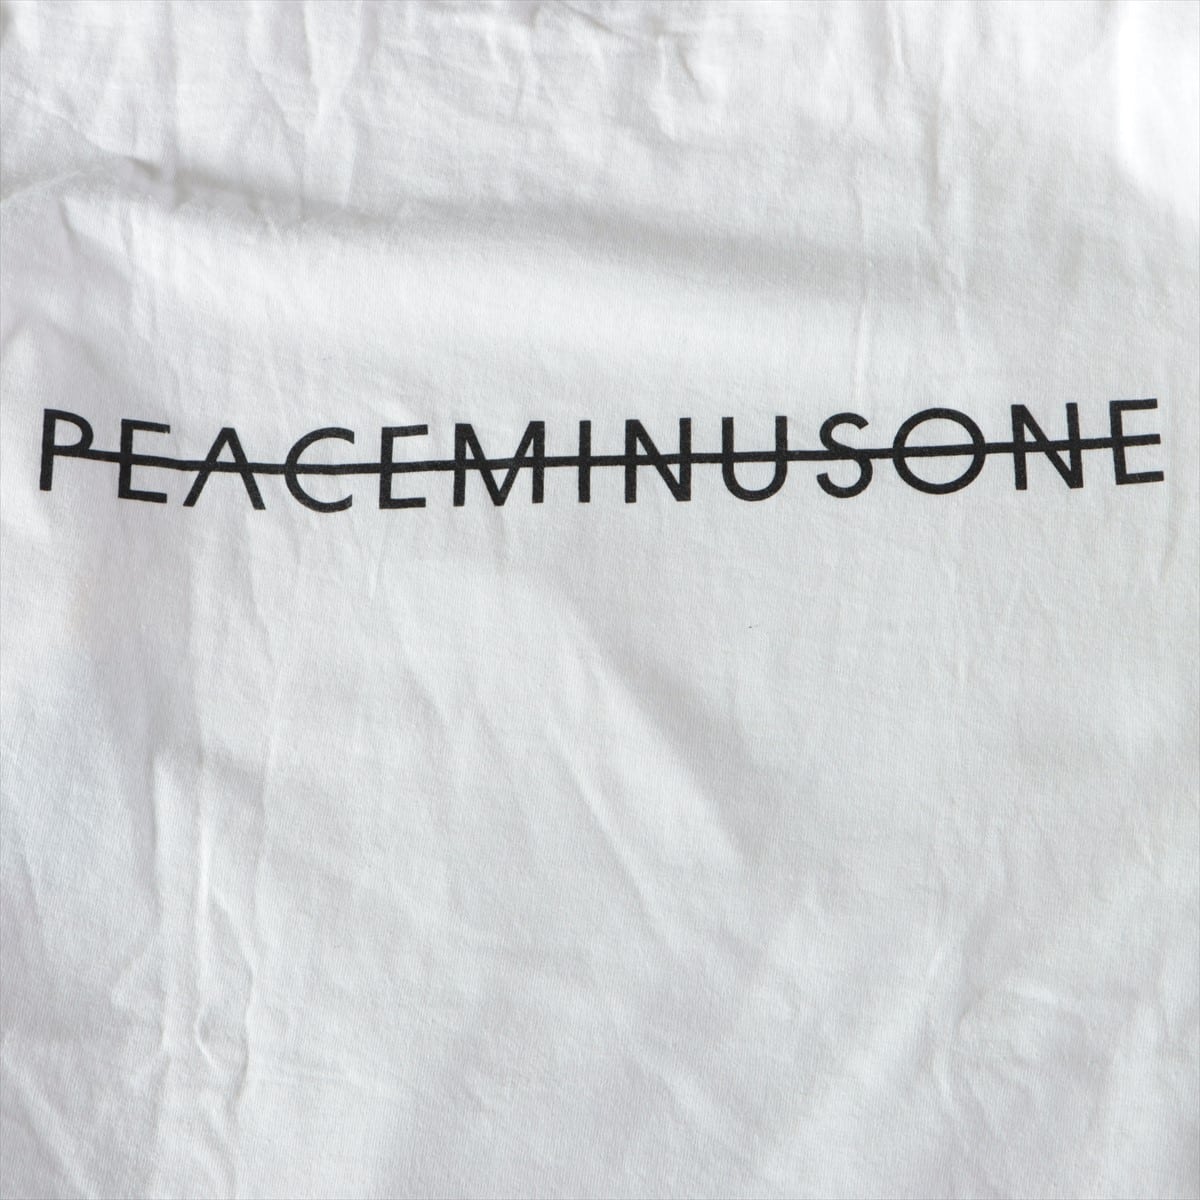 Peace minus one Cotton Long T shirts XL Men's White No brand tag Fragment The Convenience Store